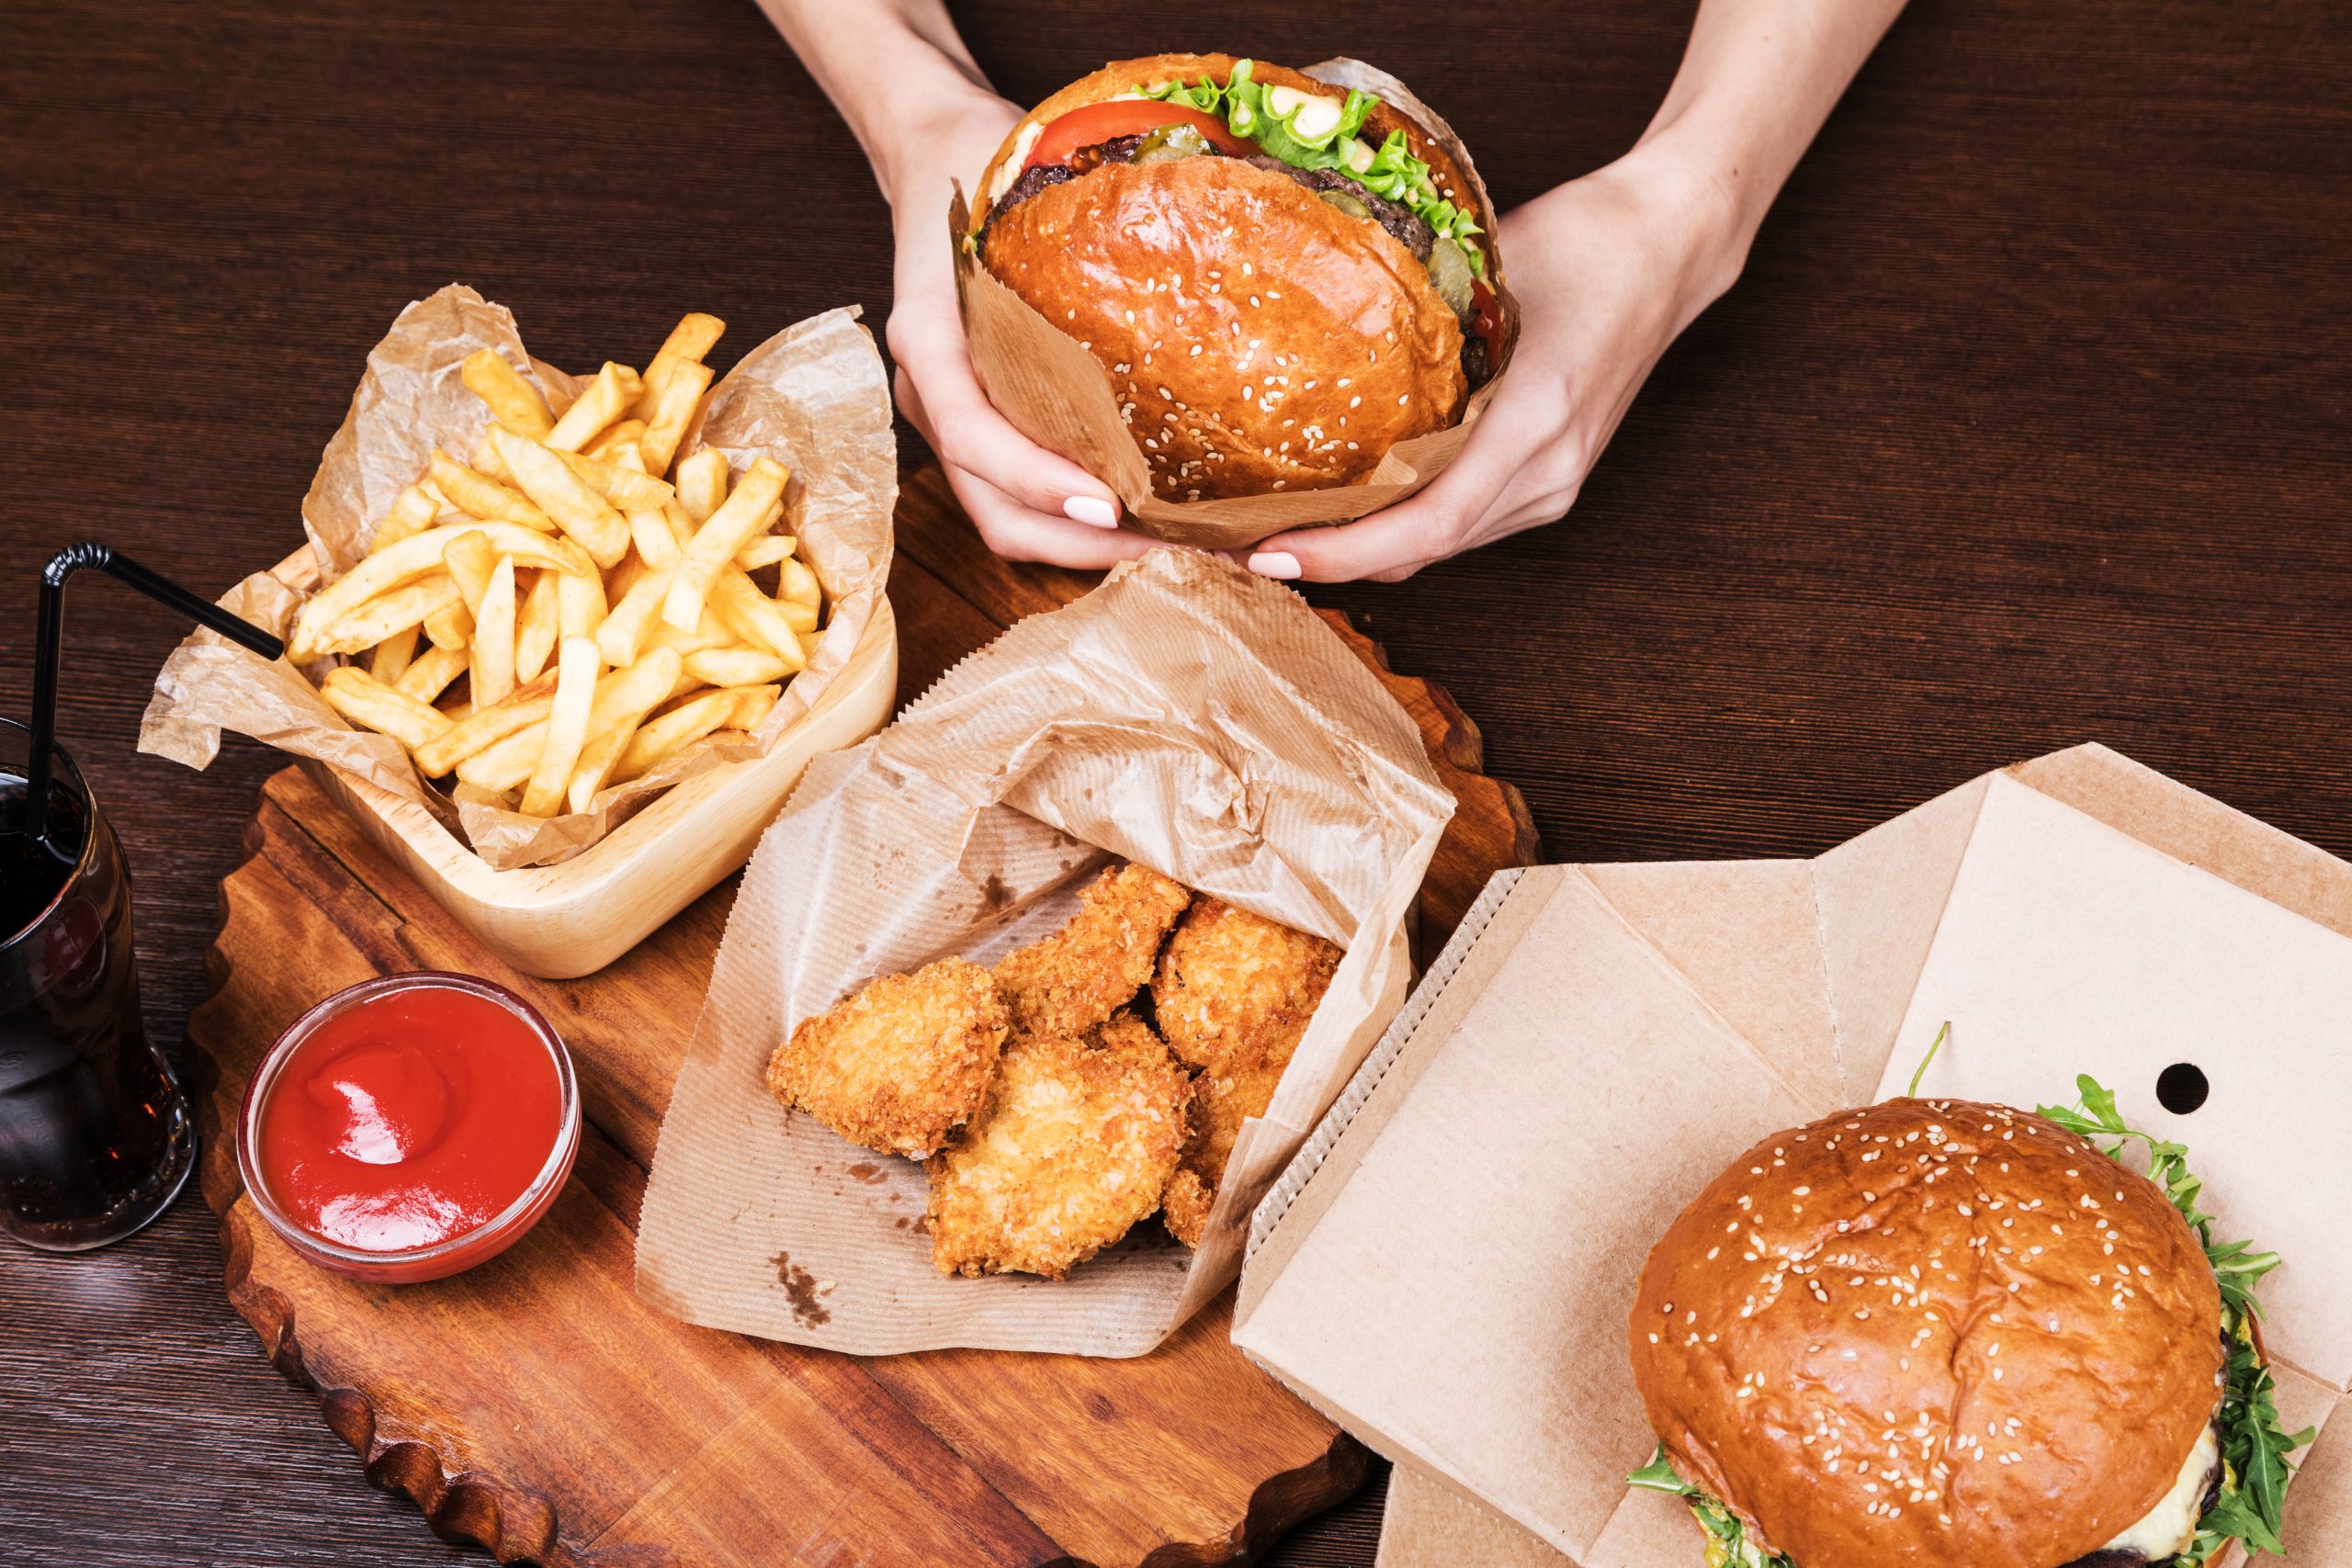 How much does fast food contribute to weight gain and obesity?